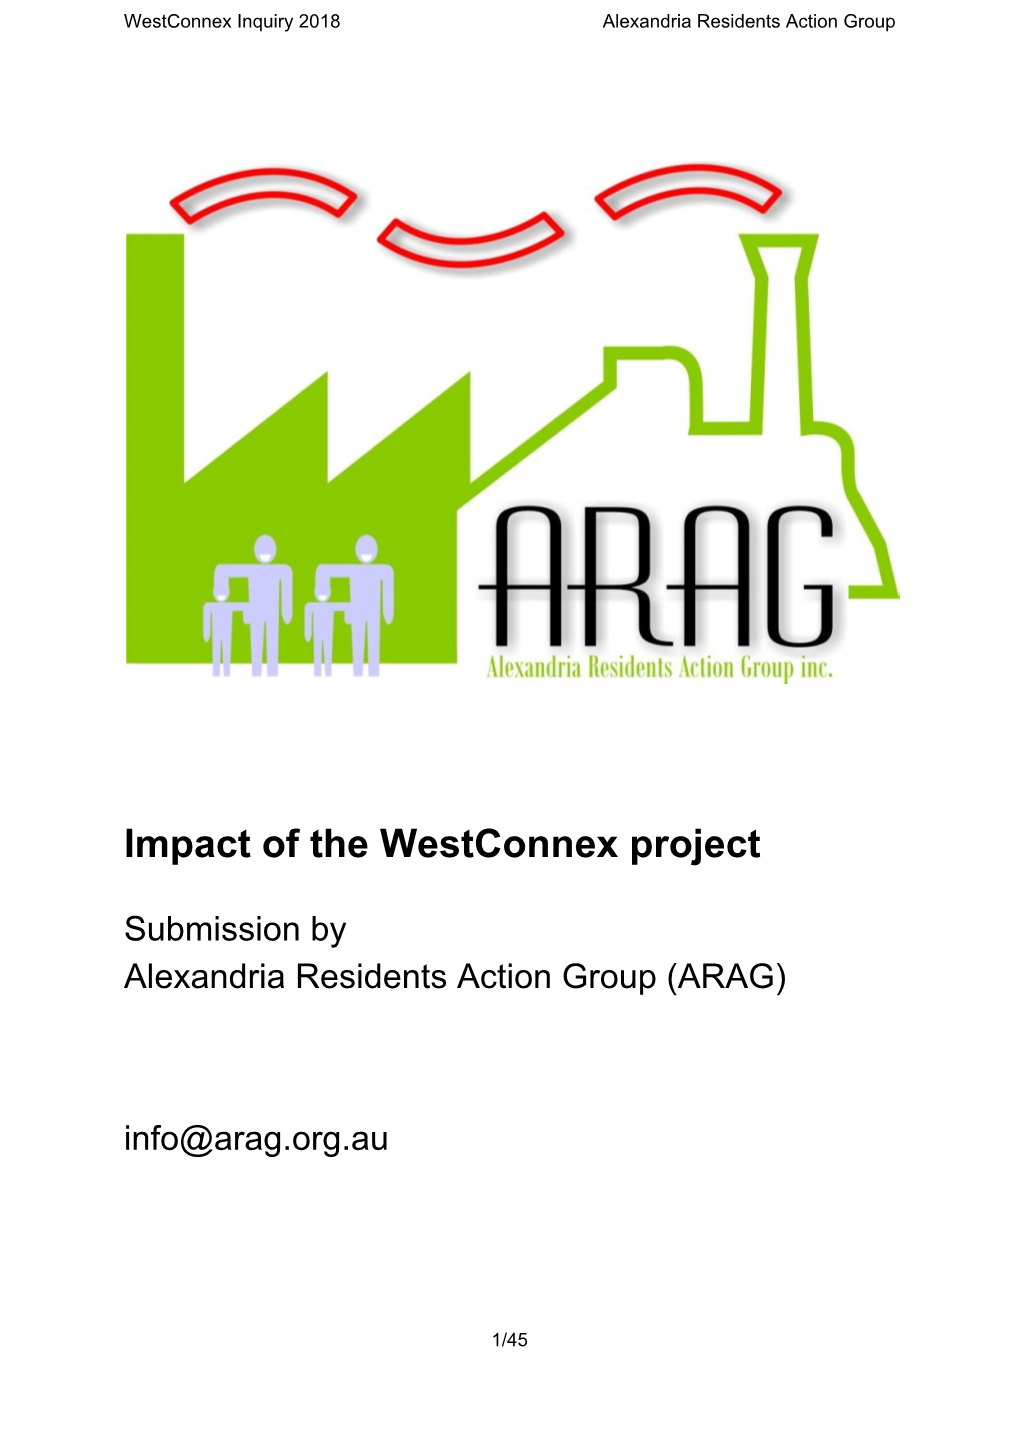 Impact of the Westconnex Project